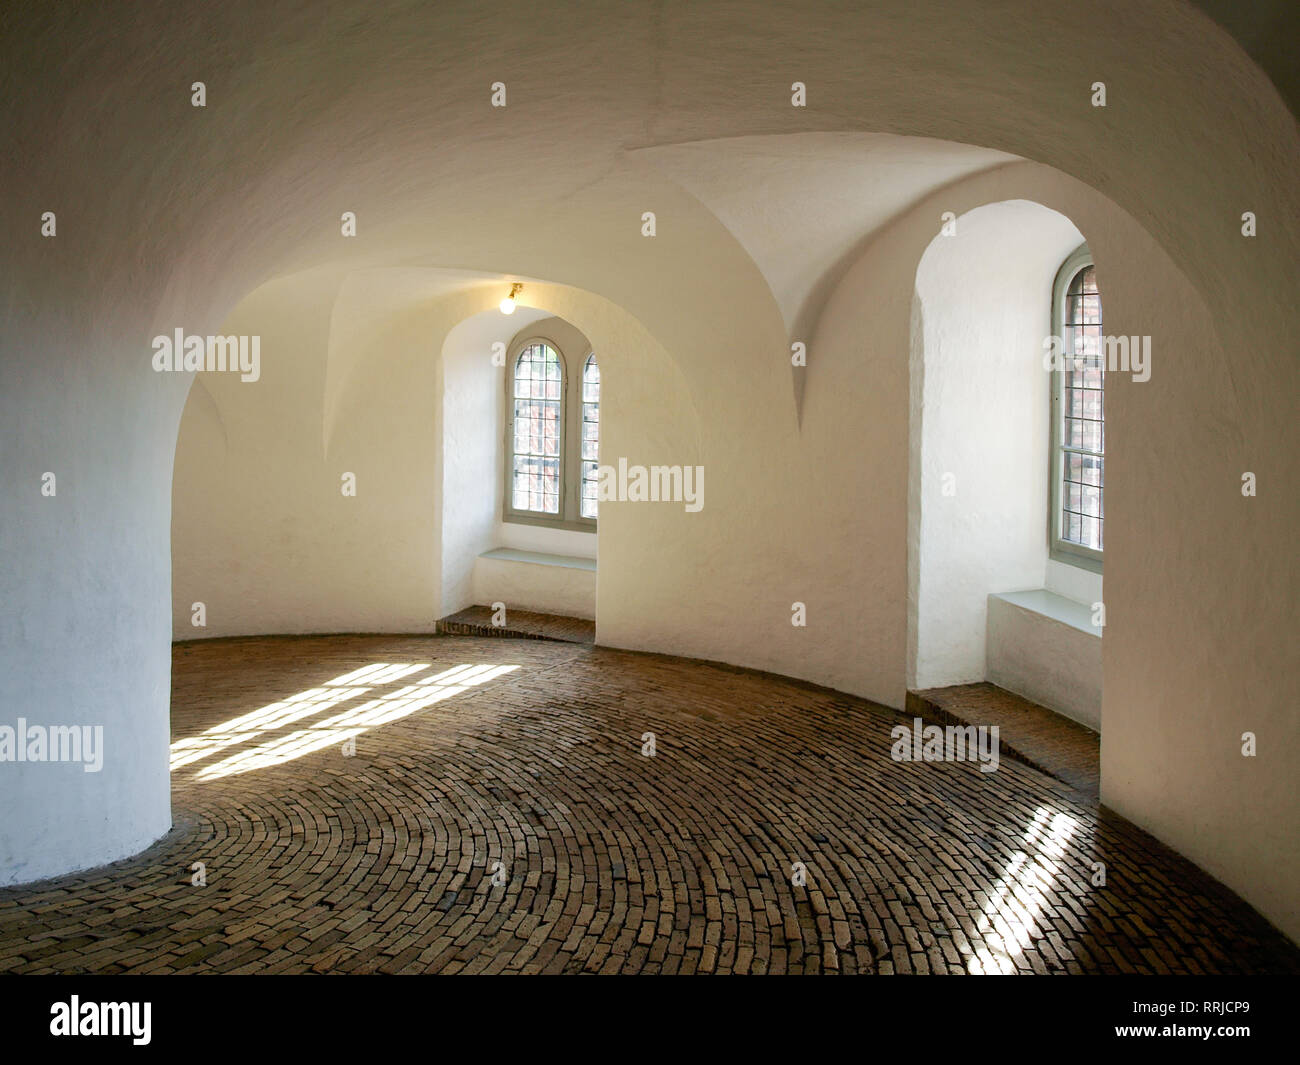 An inside view of the spiral ramp of the Rundetårn (Rundetaarn, also known as the Round Tower in English), a 17th century tower in Copenhagen, Denmark Stock Photo